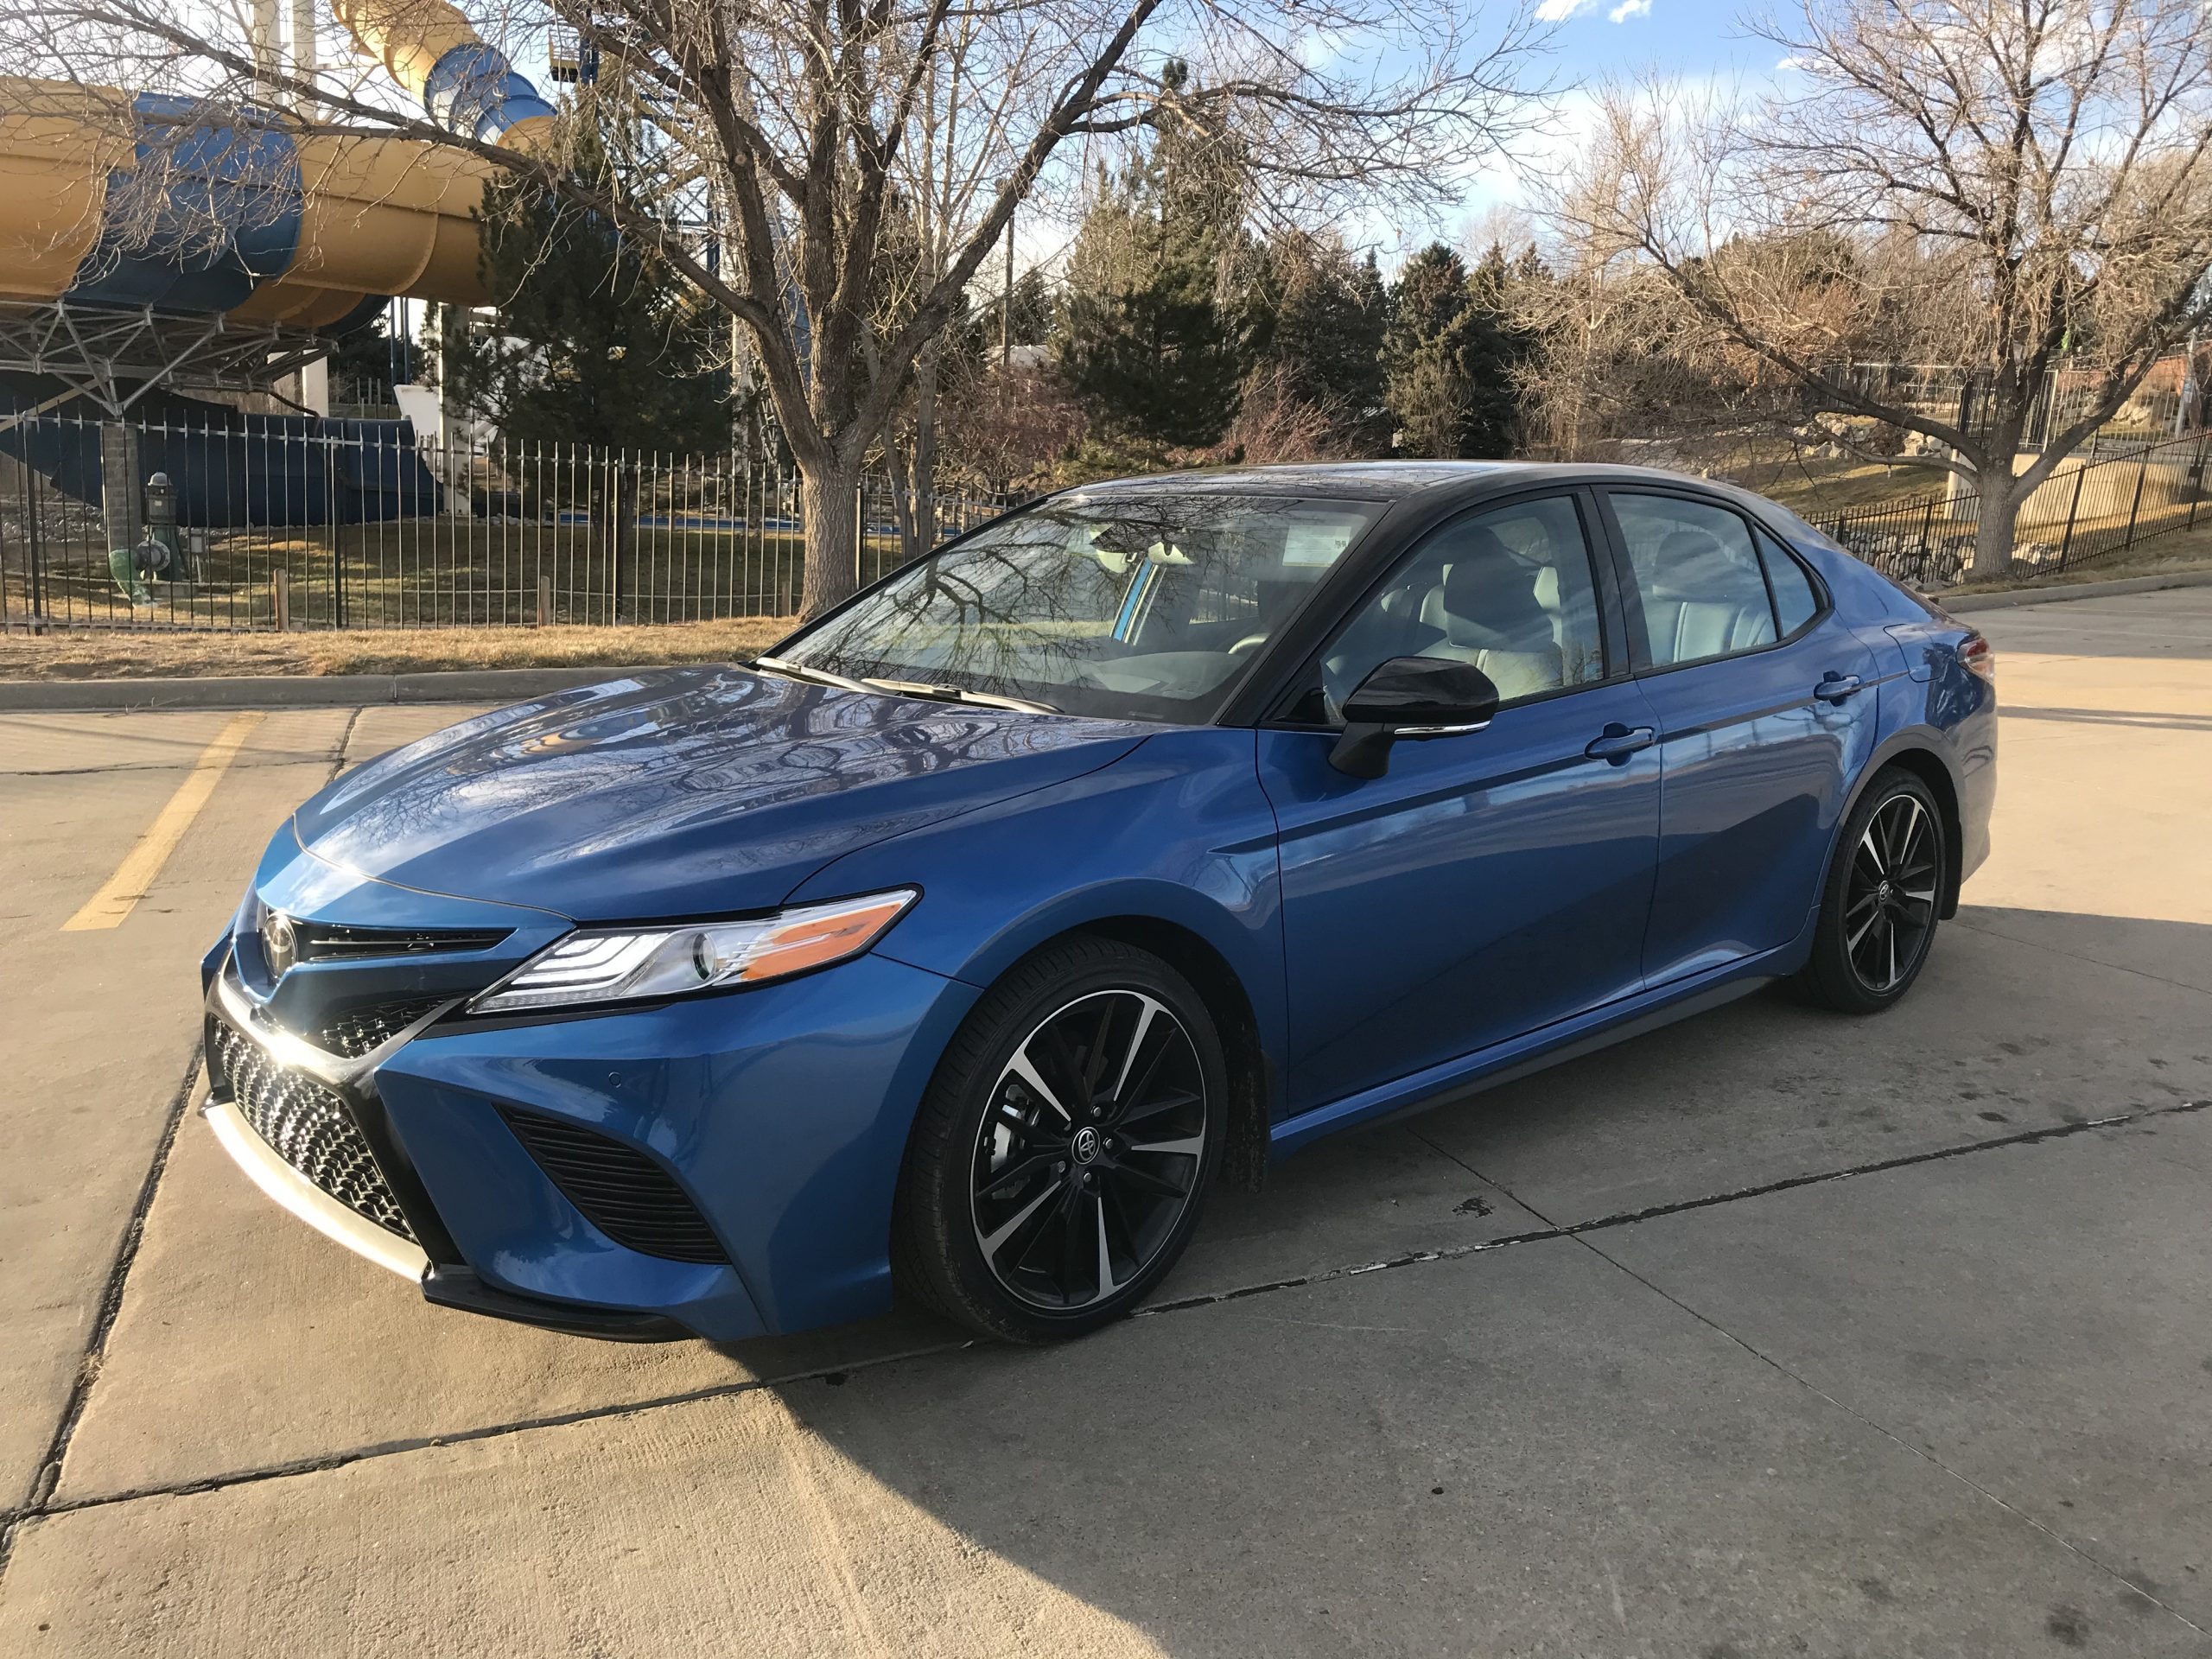 2021 Toyota Camry XSE: A Comfortable, Capable, and Extremely Slow Sedan